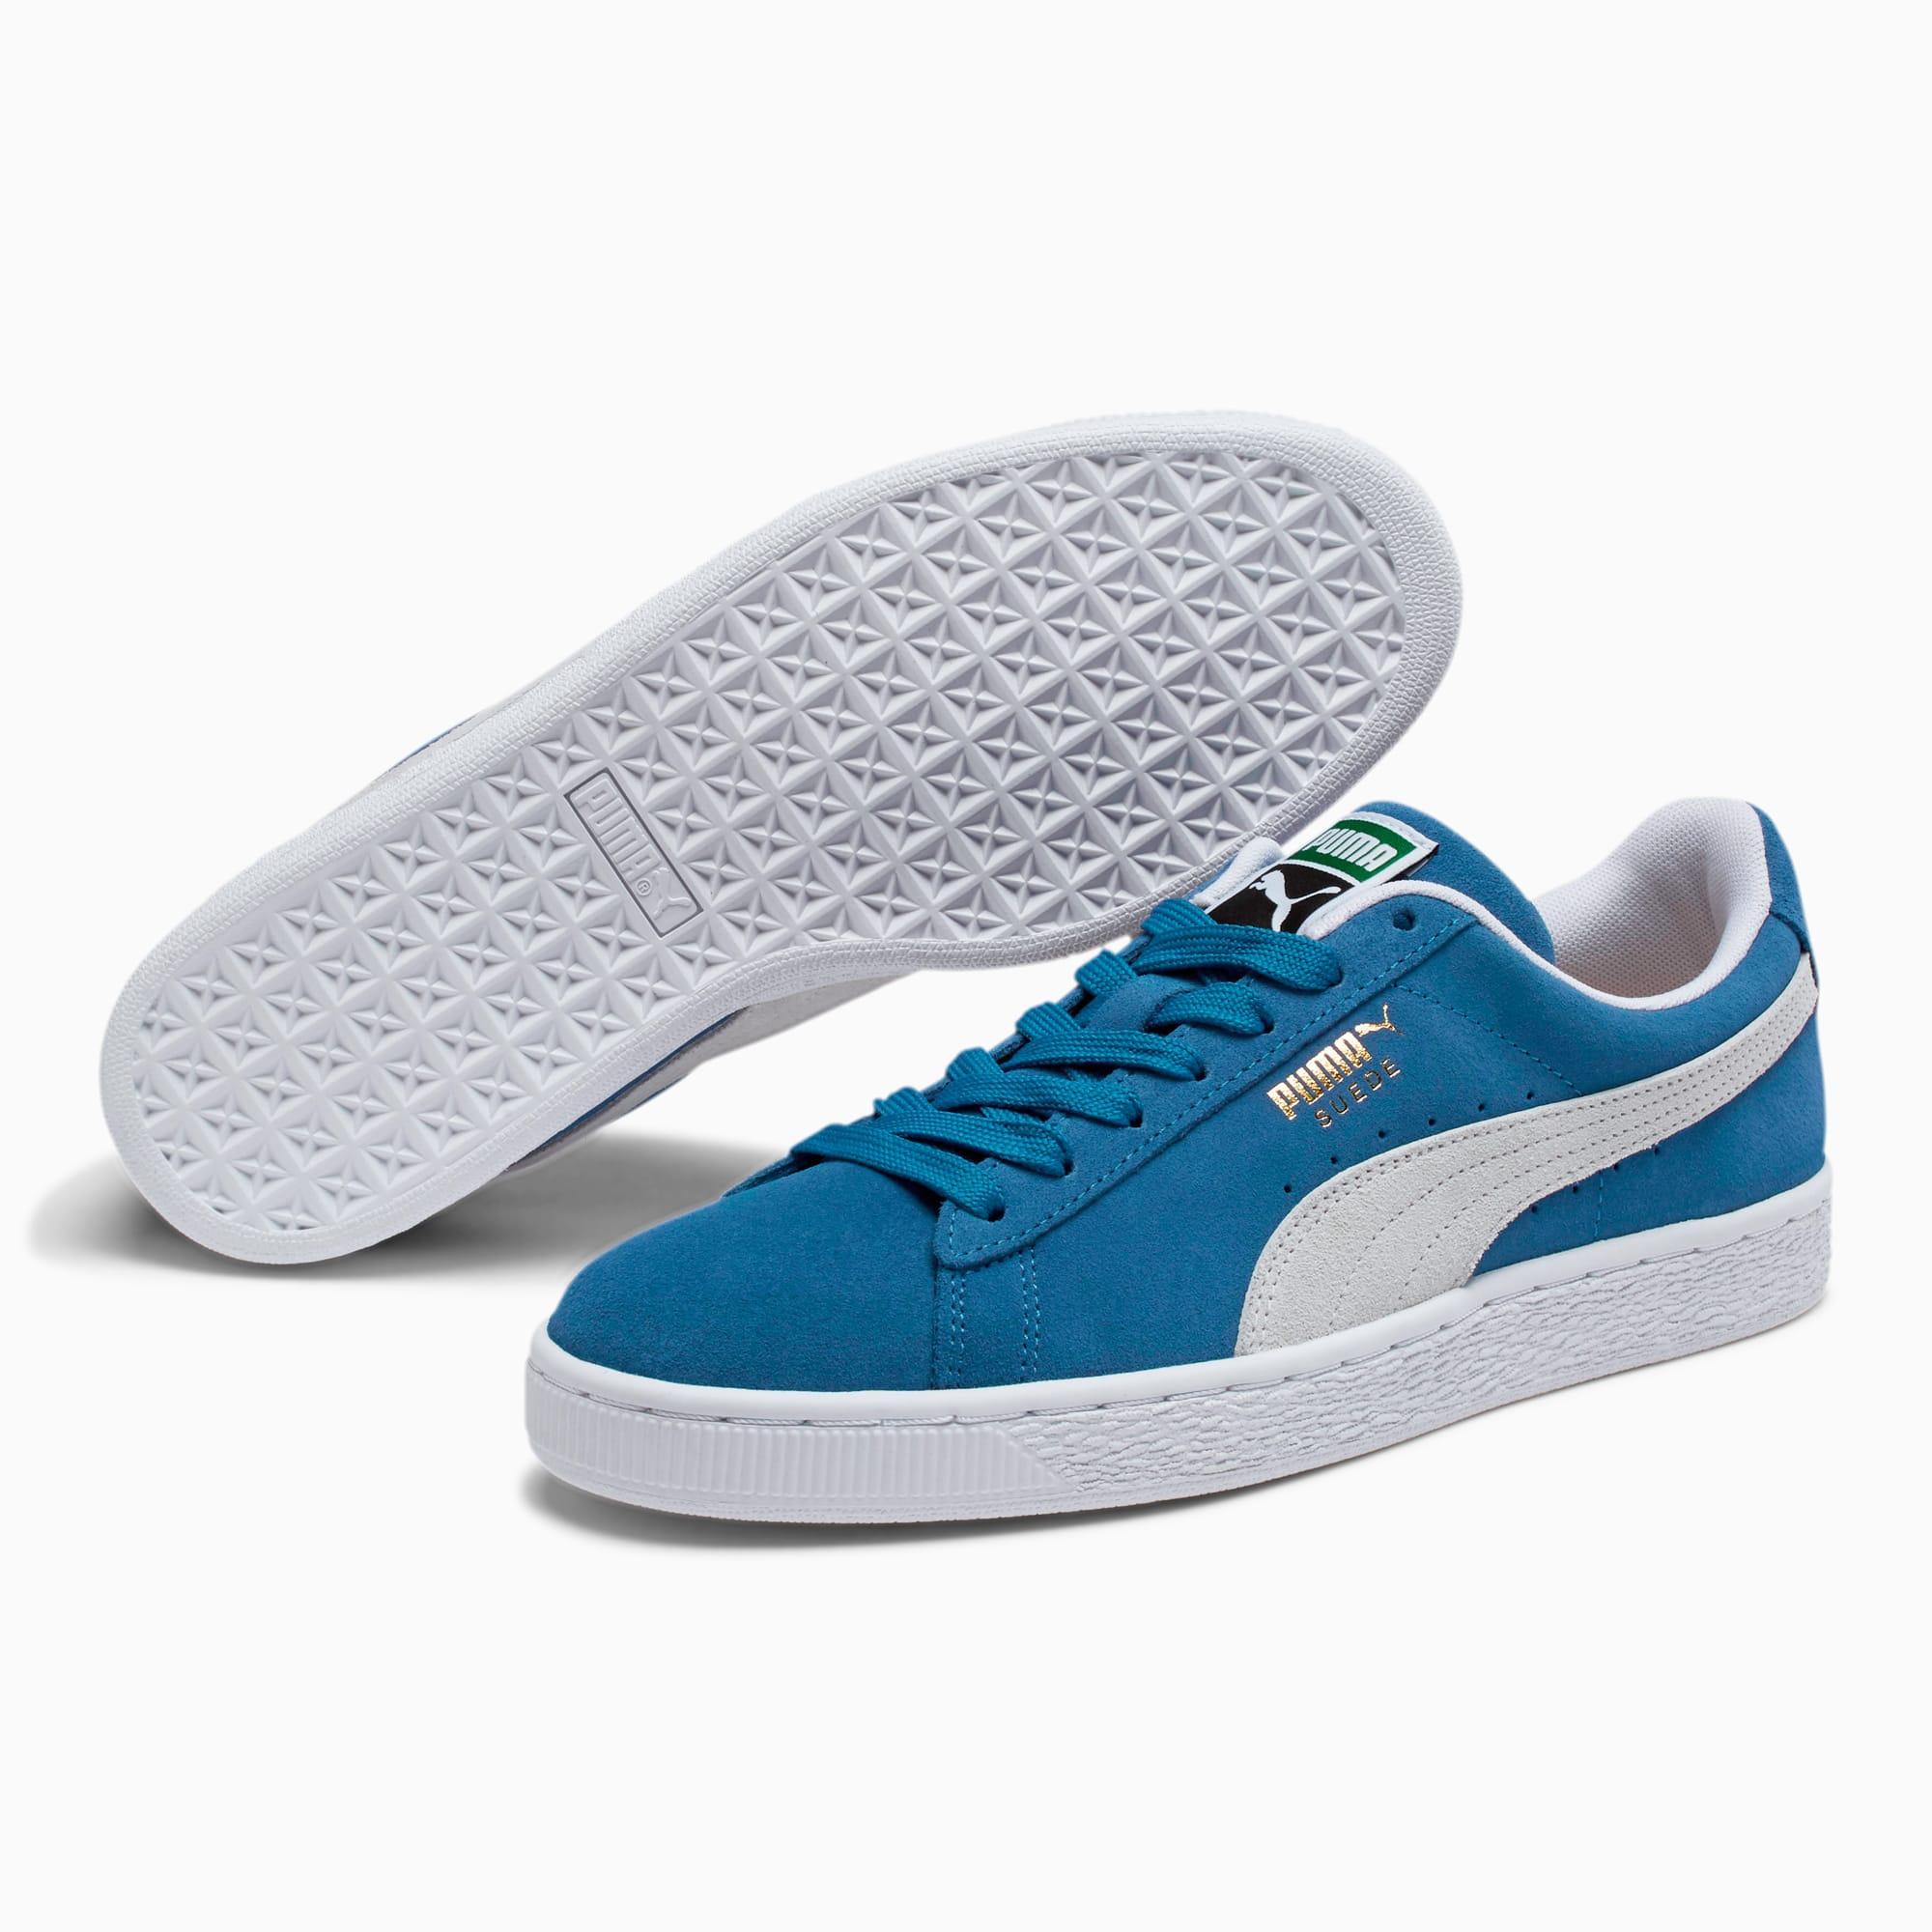 PUMA Suede Classic+ Sneakers in 64 (Blue) for Men - Lyst